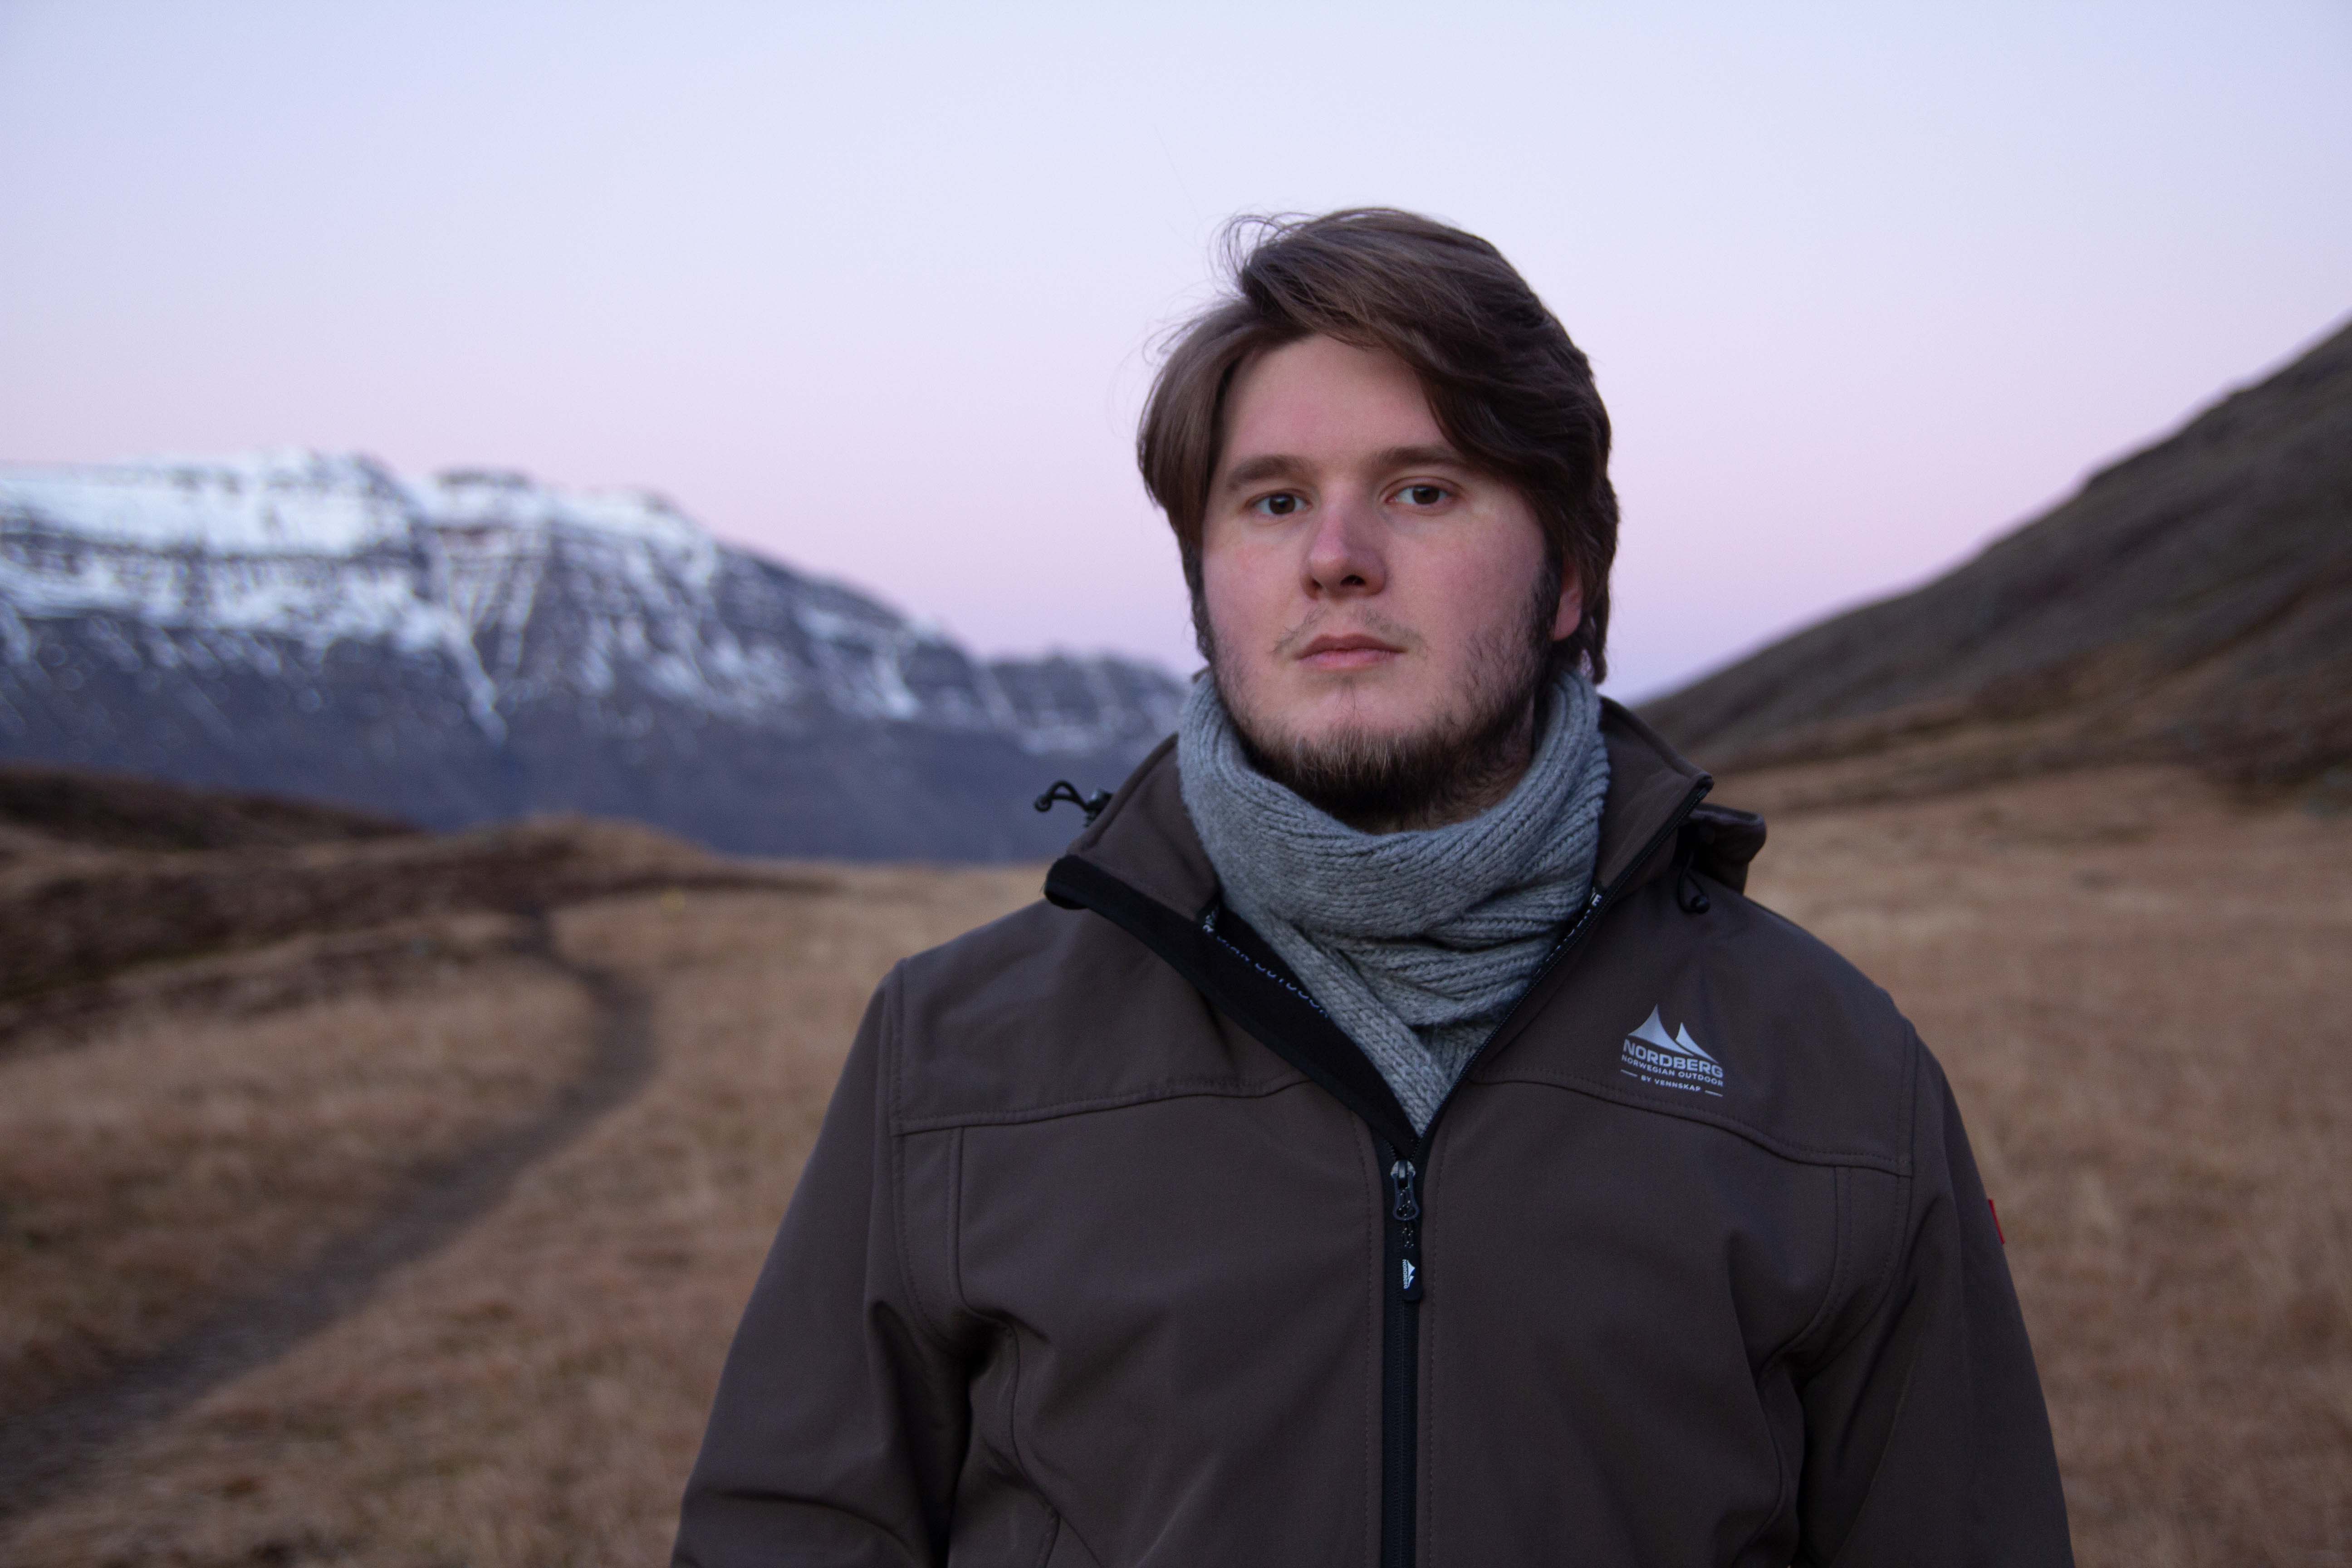 Philipp Valenta in Iceland <br> Image author: Philipp Valenta; Image usage: Use with source reference permitted for editorial contributions via KWS. Commercial distribution to third parties is not permitted.